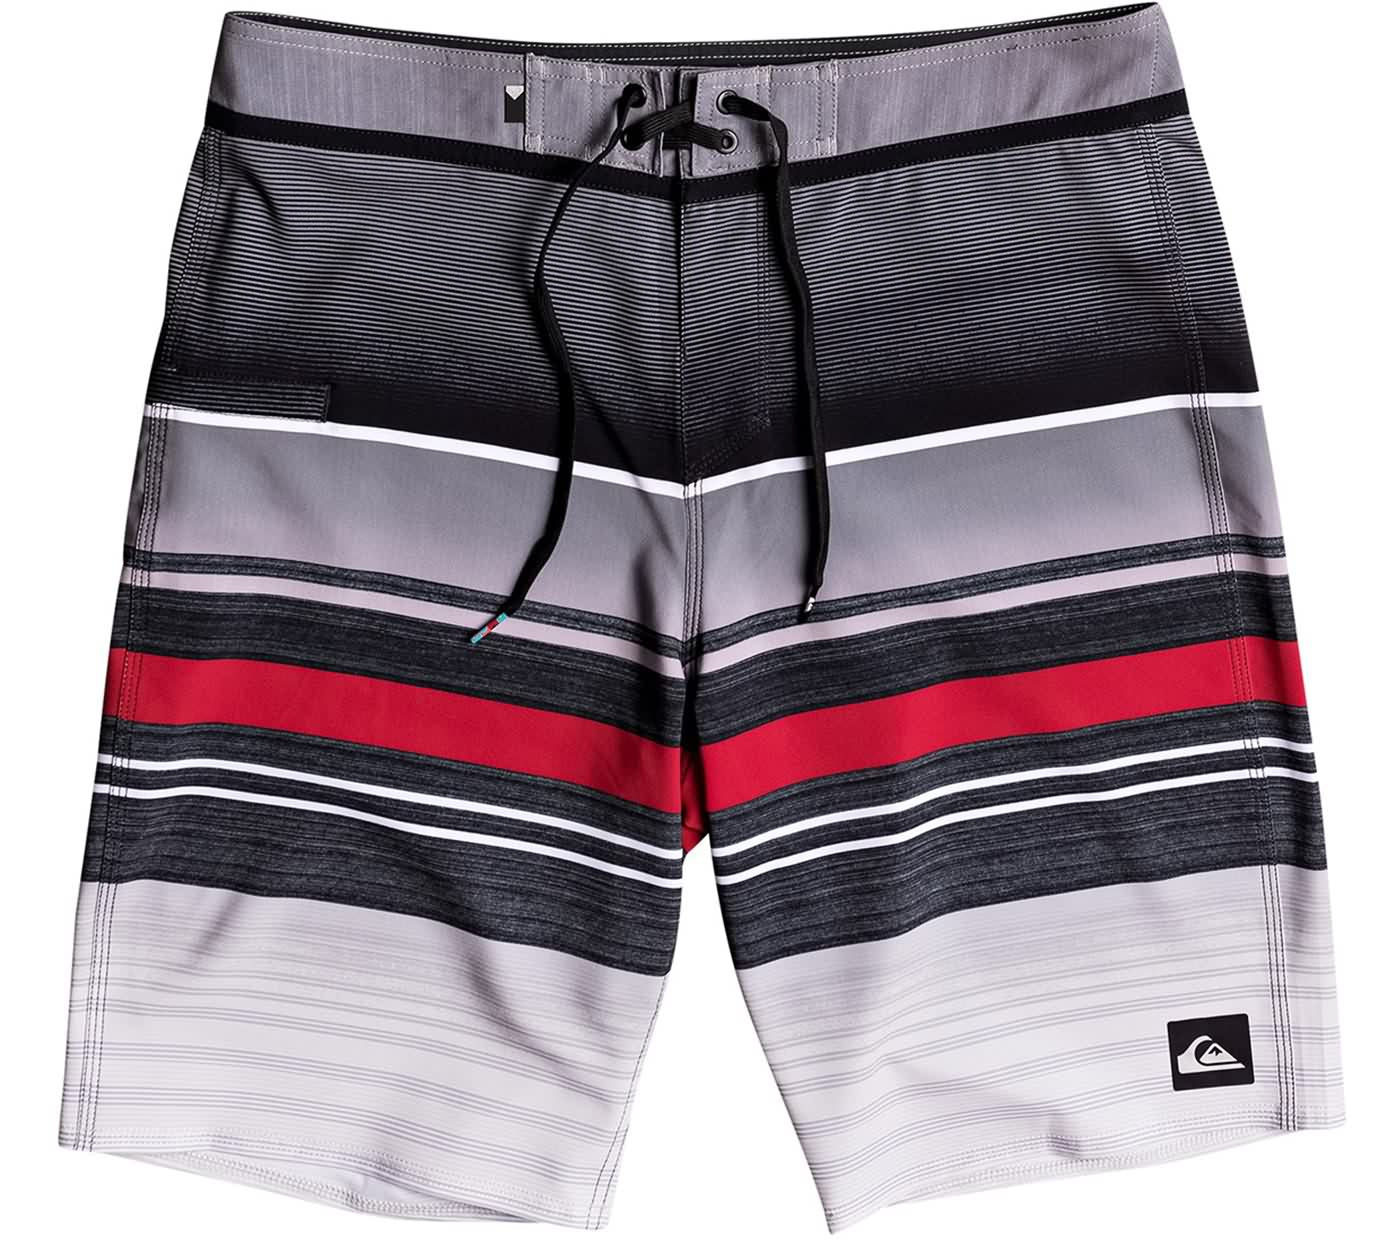 Quiksilver Surf Fall 2017 Mens Surfing Boardshorts Collection